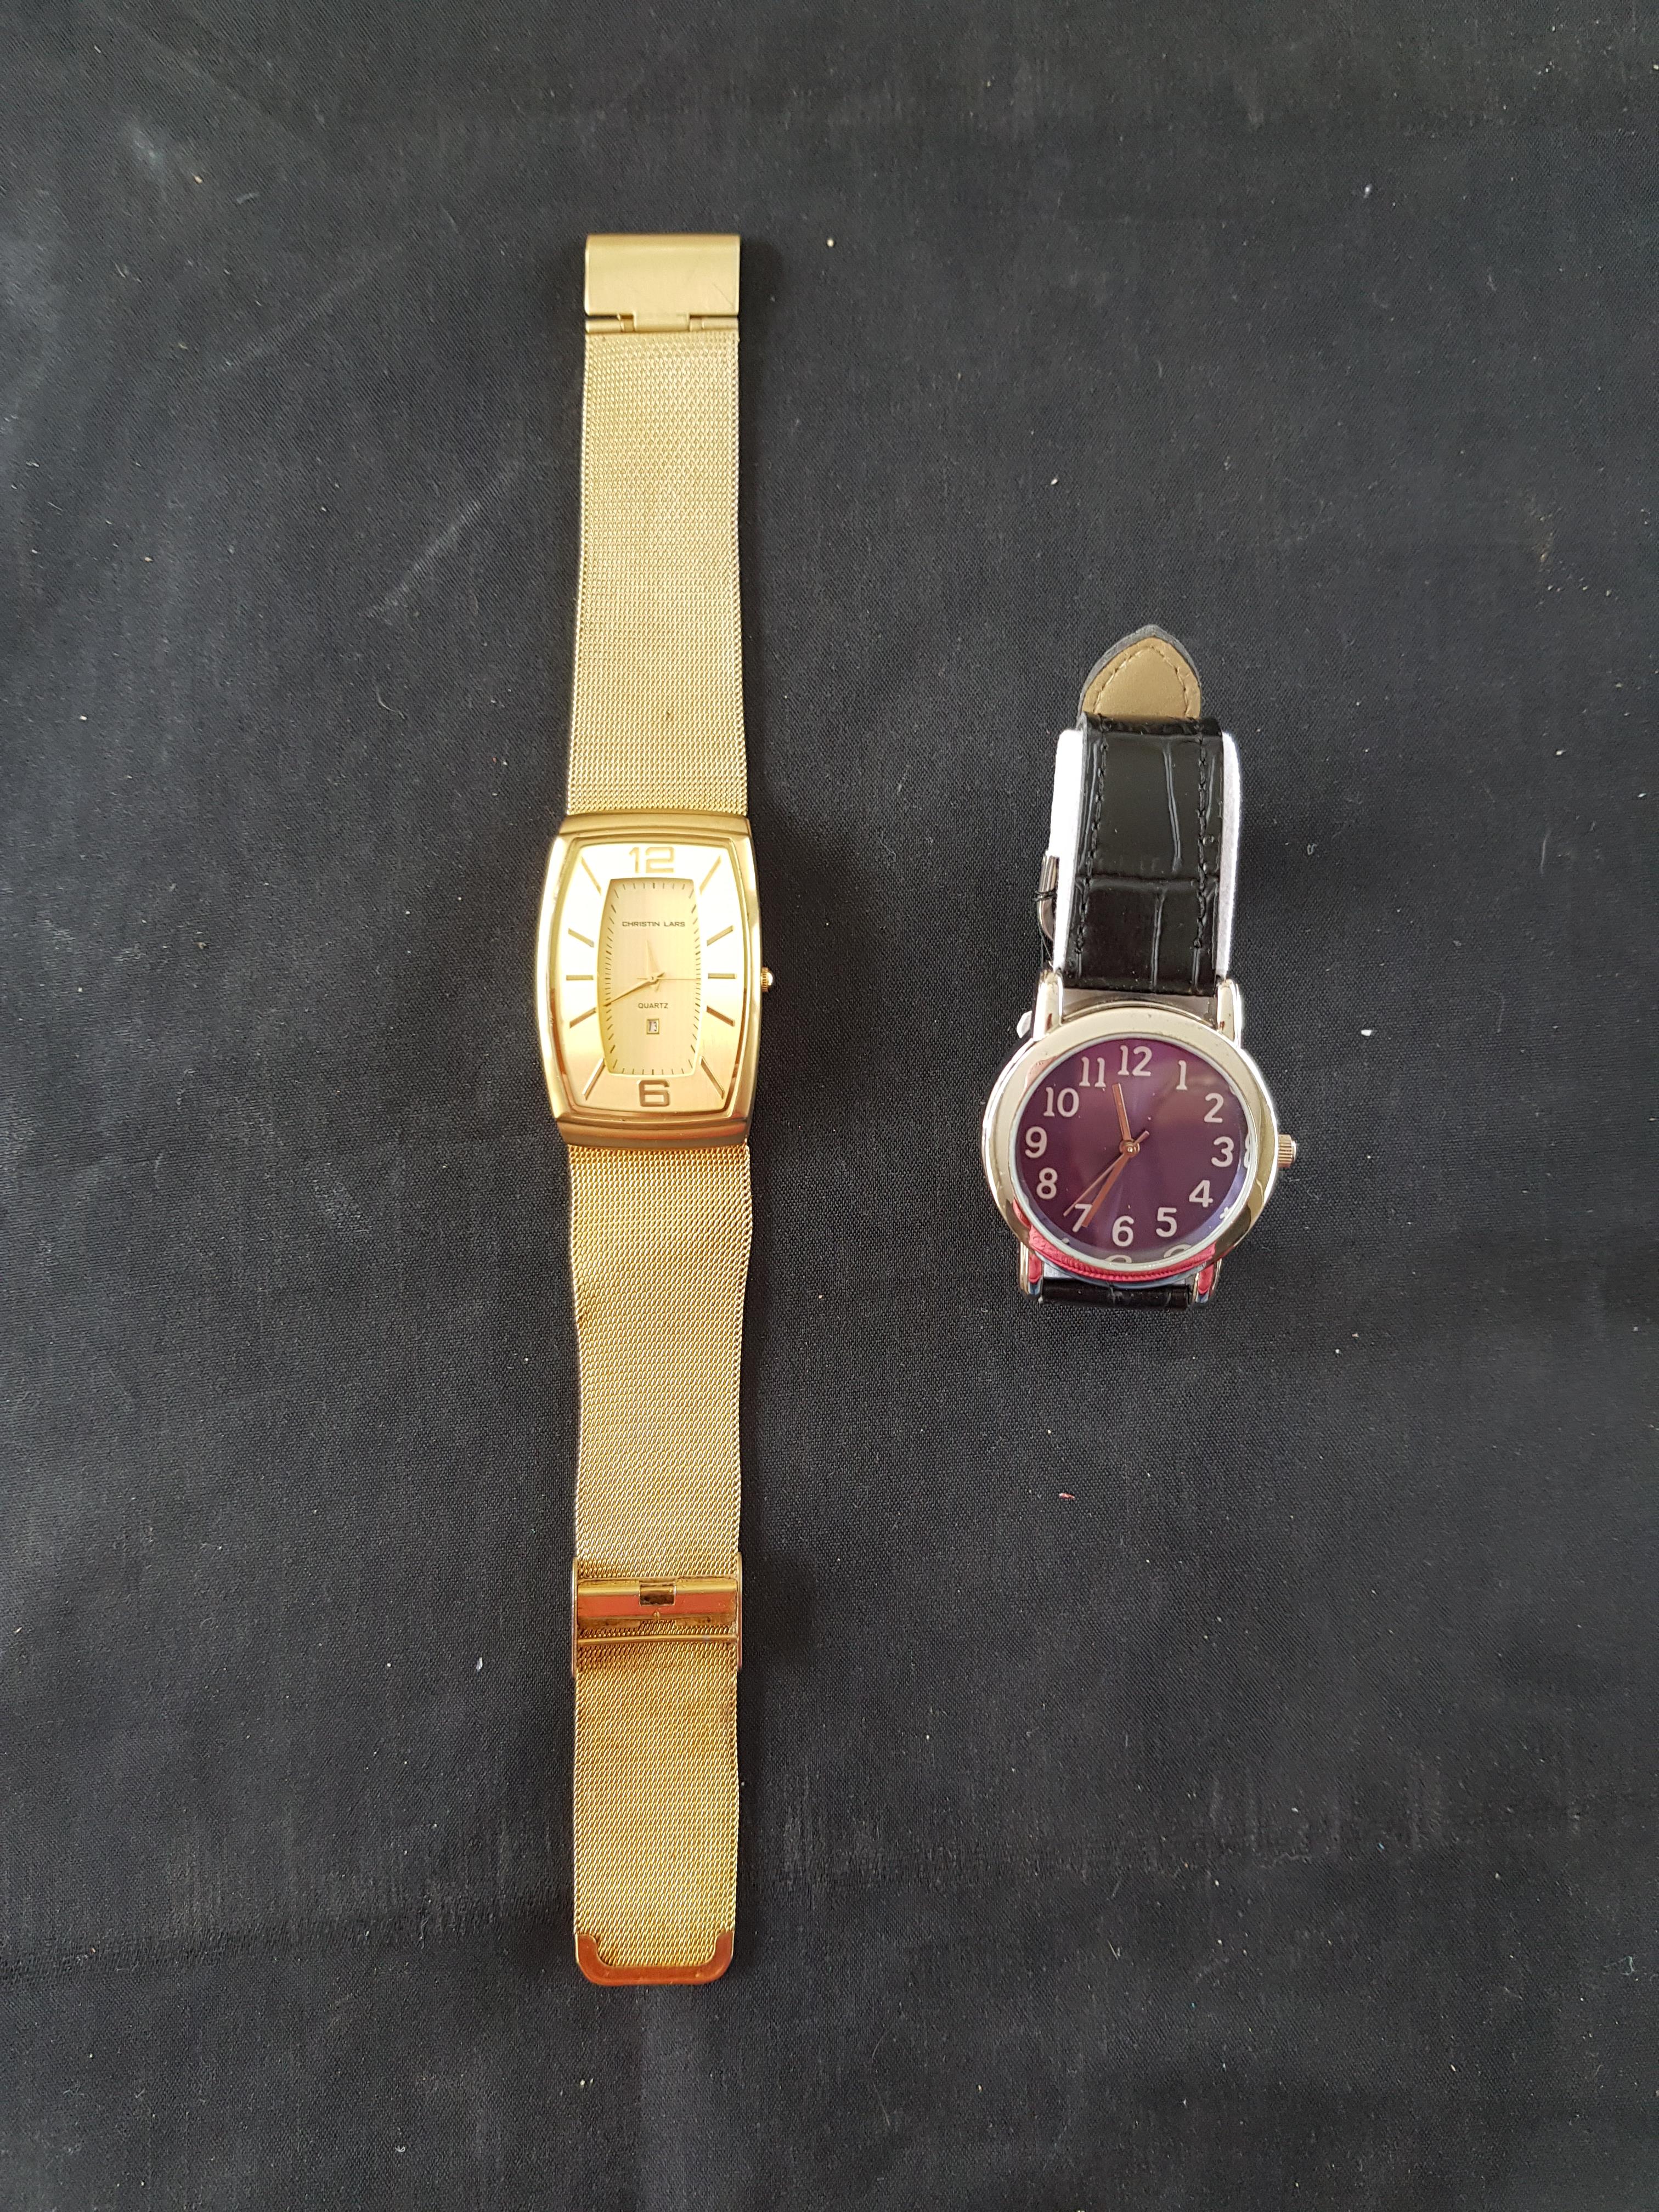 Vintage Christin Lars and Solo Watches - Image 2 of 3